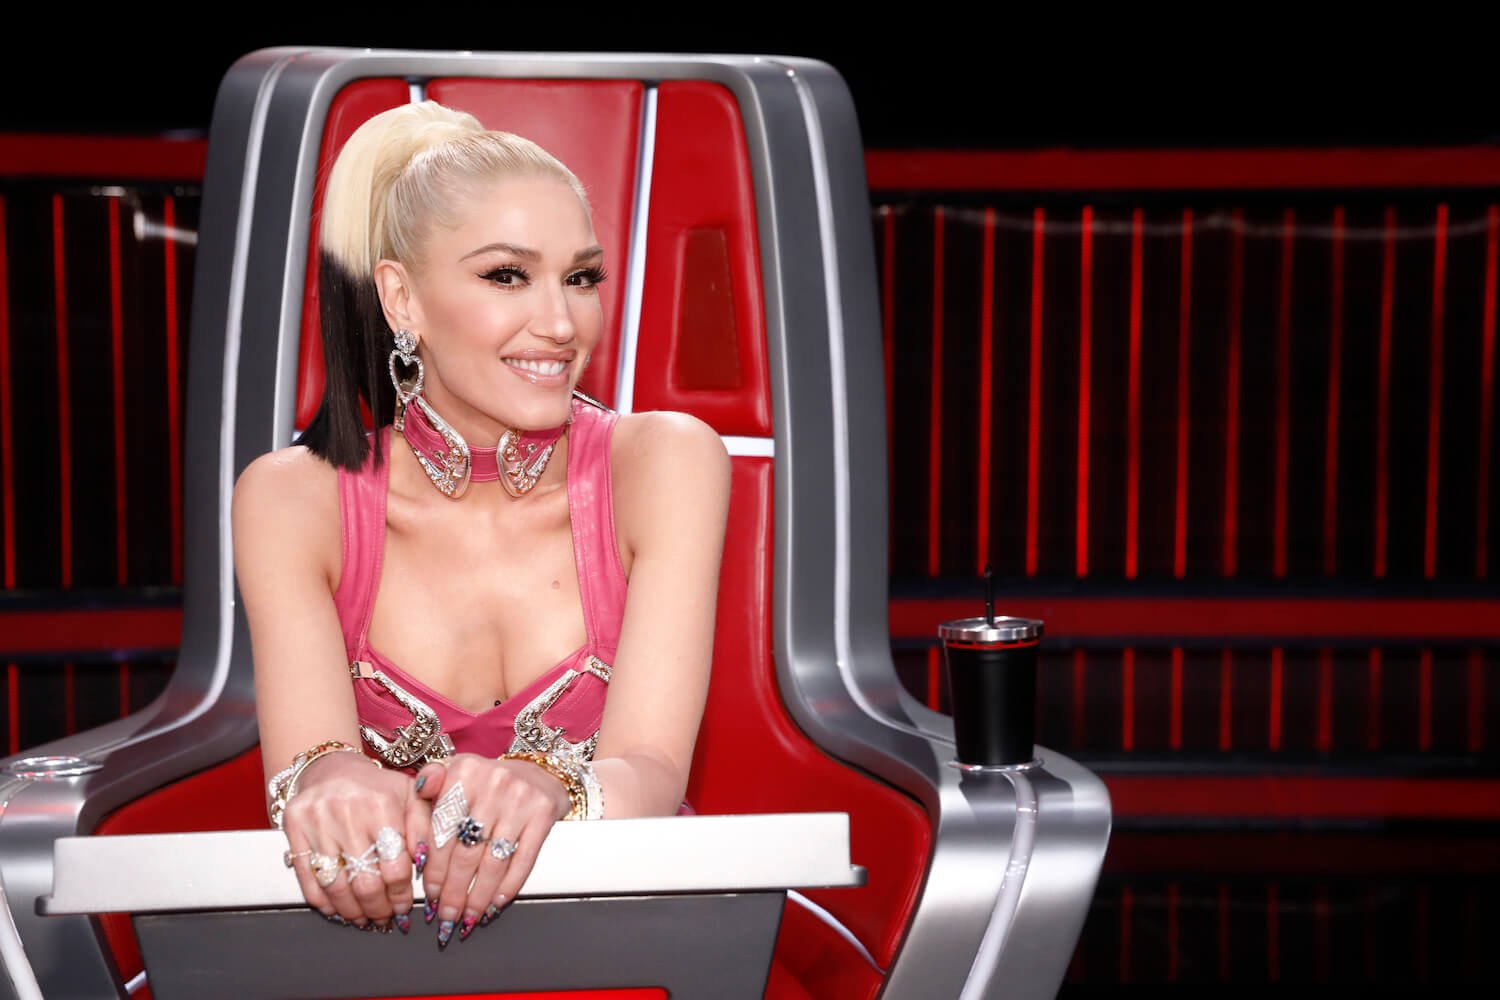 'The Voice' Season 24 coach Gwen Stefani leaning over the coach's chair and smiling